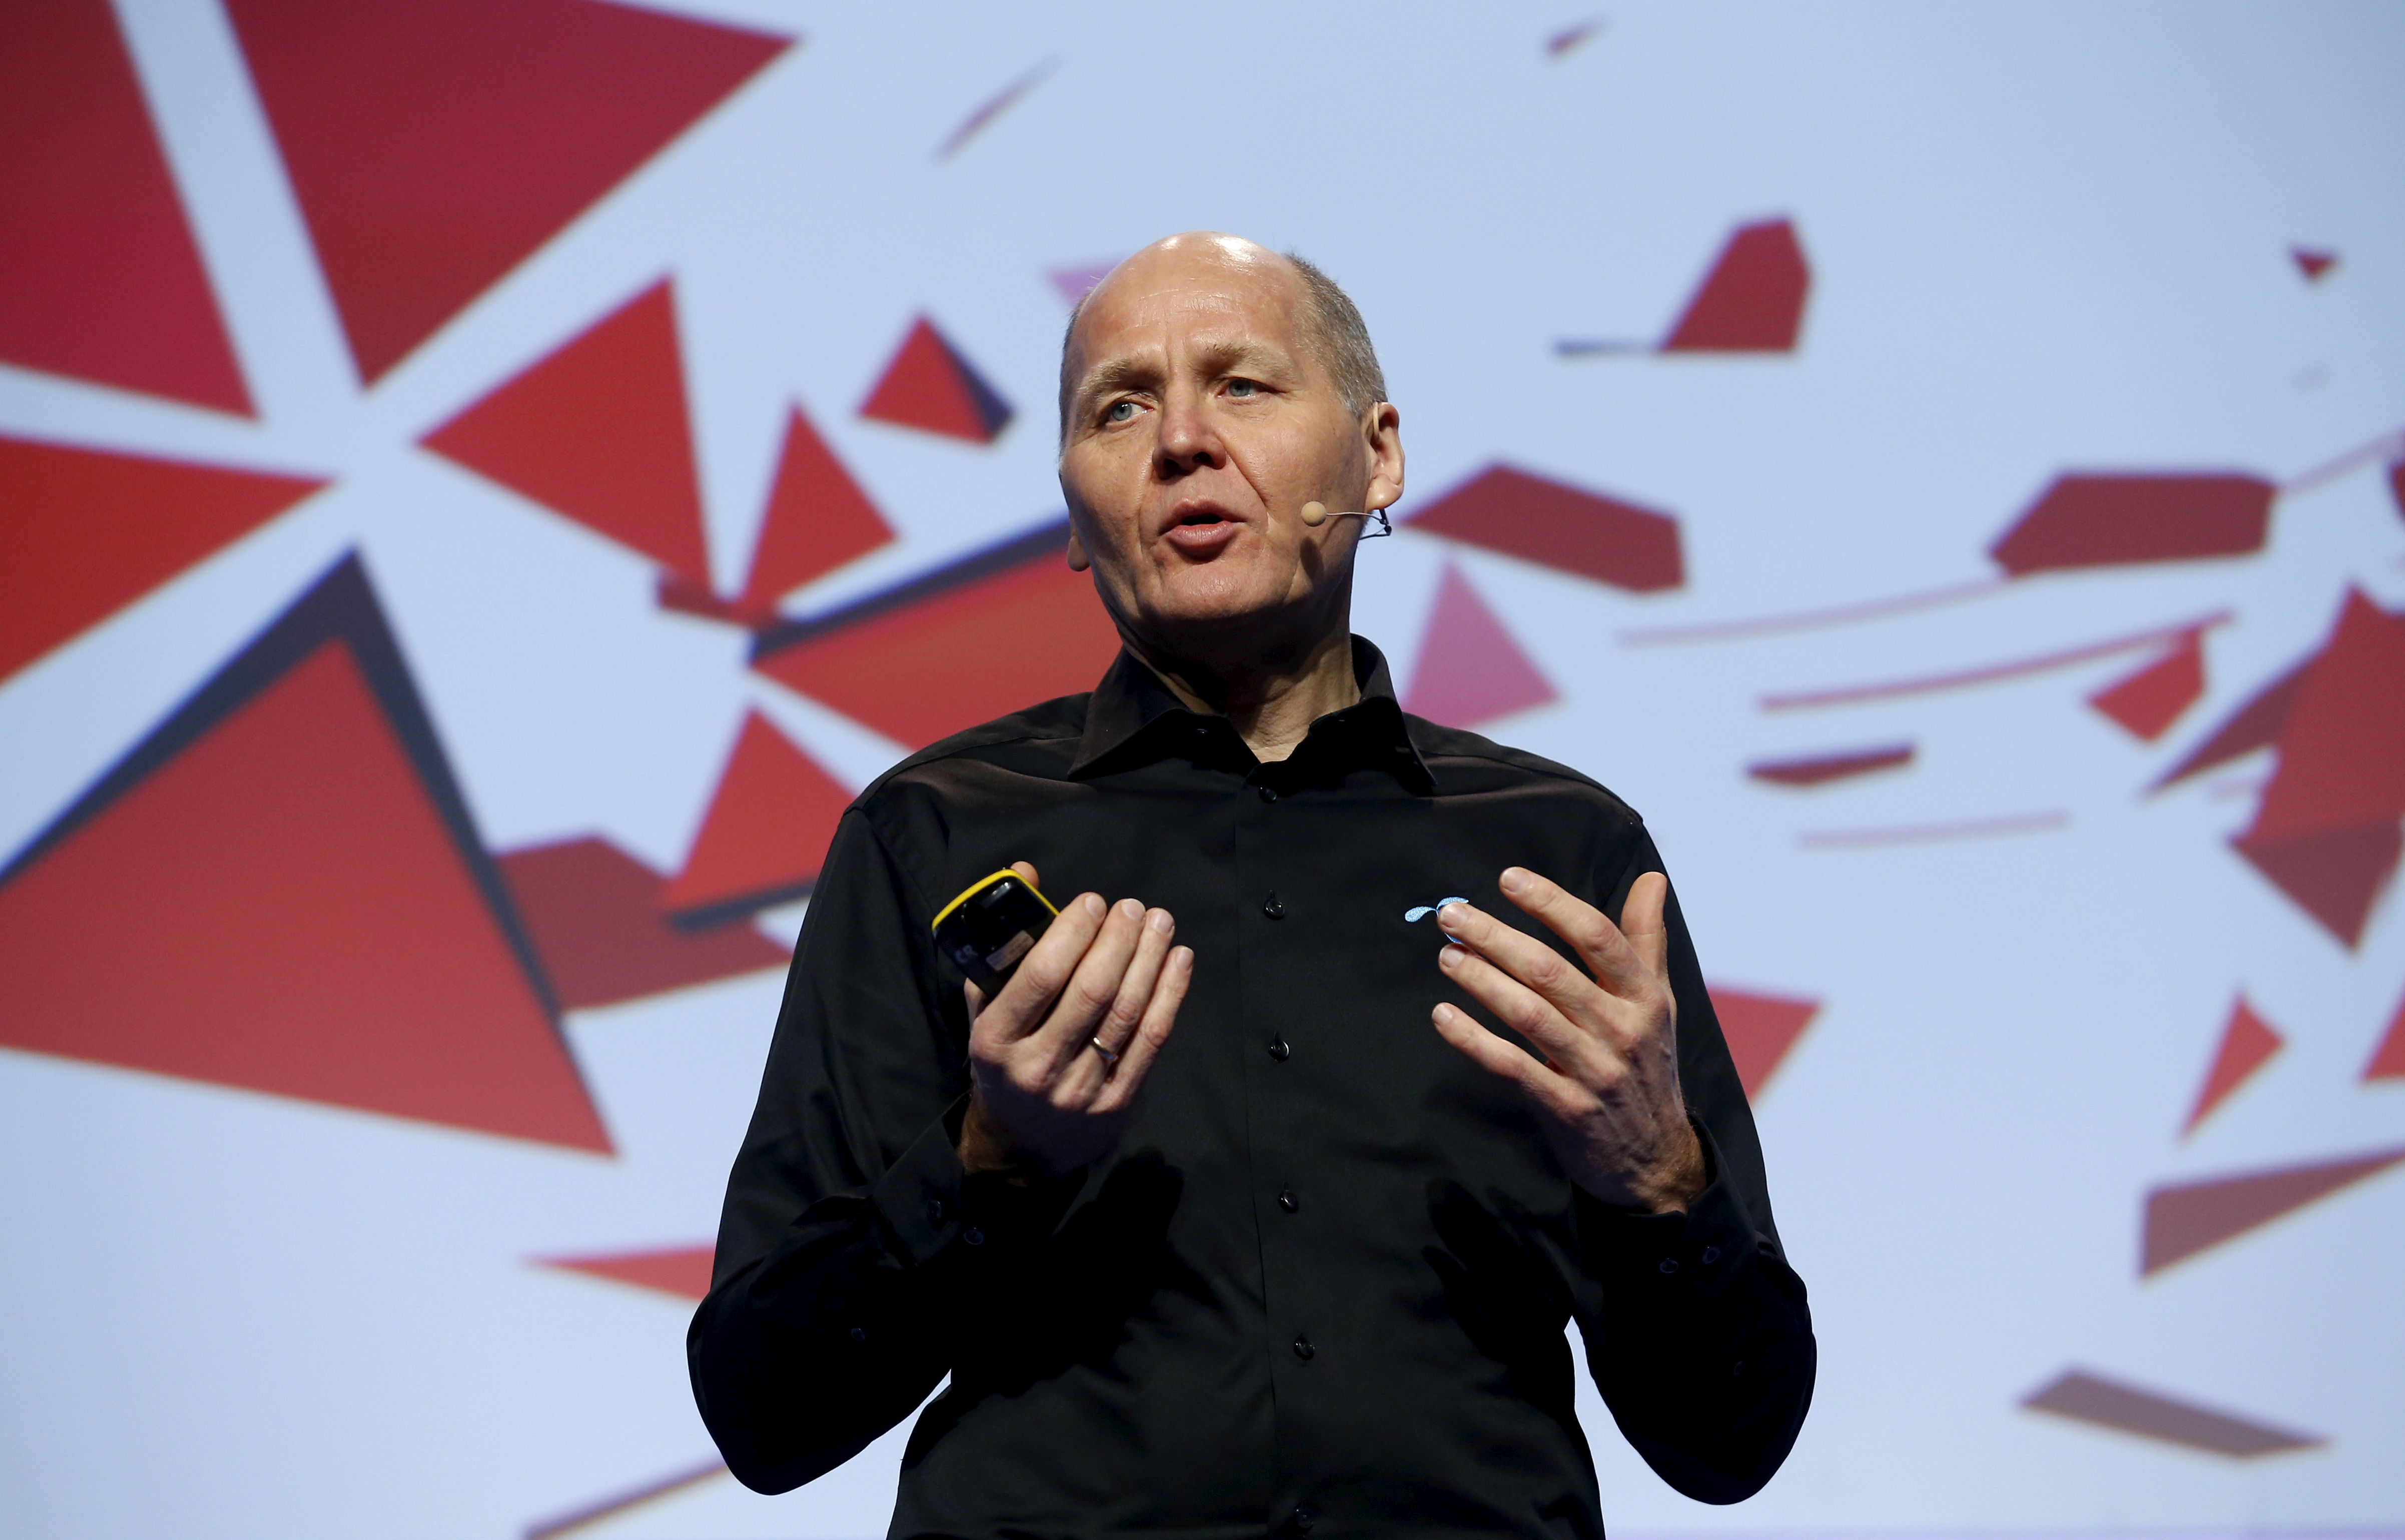 Sigve Brekke, President and CEO of Telenor, delivers a keynote speech during the Mobile World Congress in Barcelona